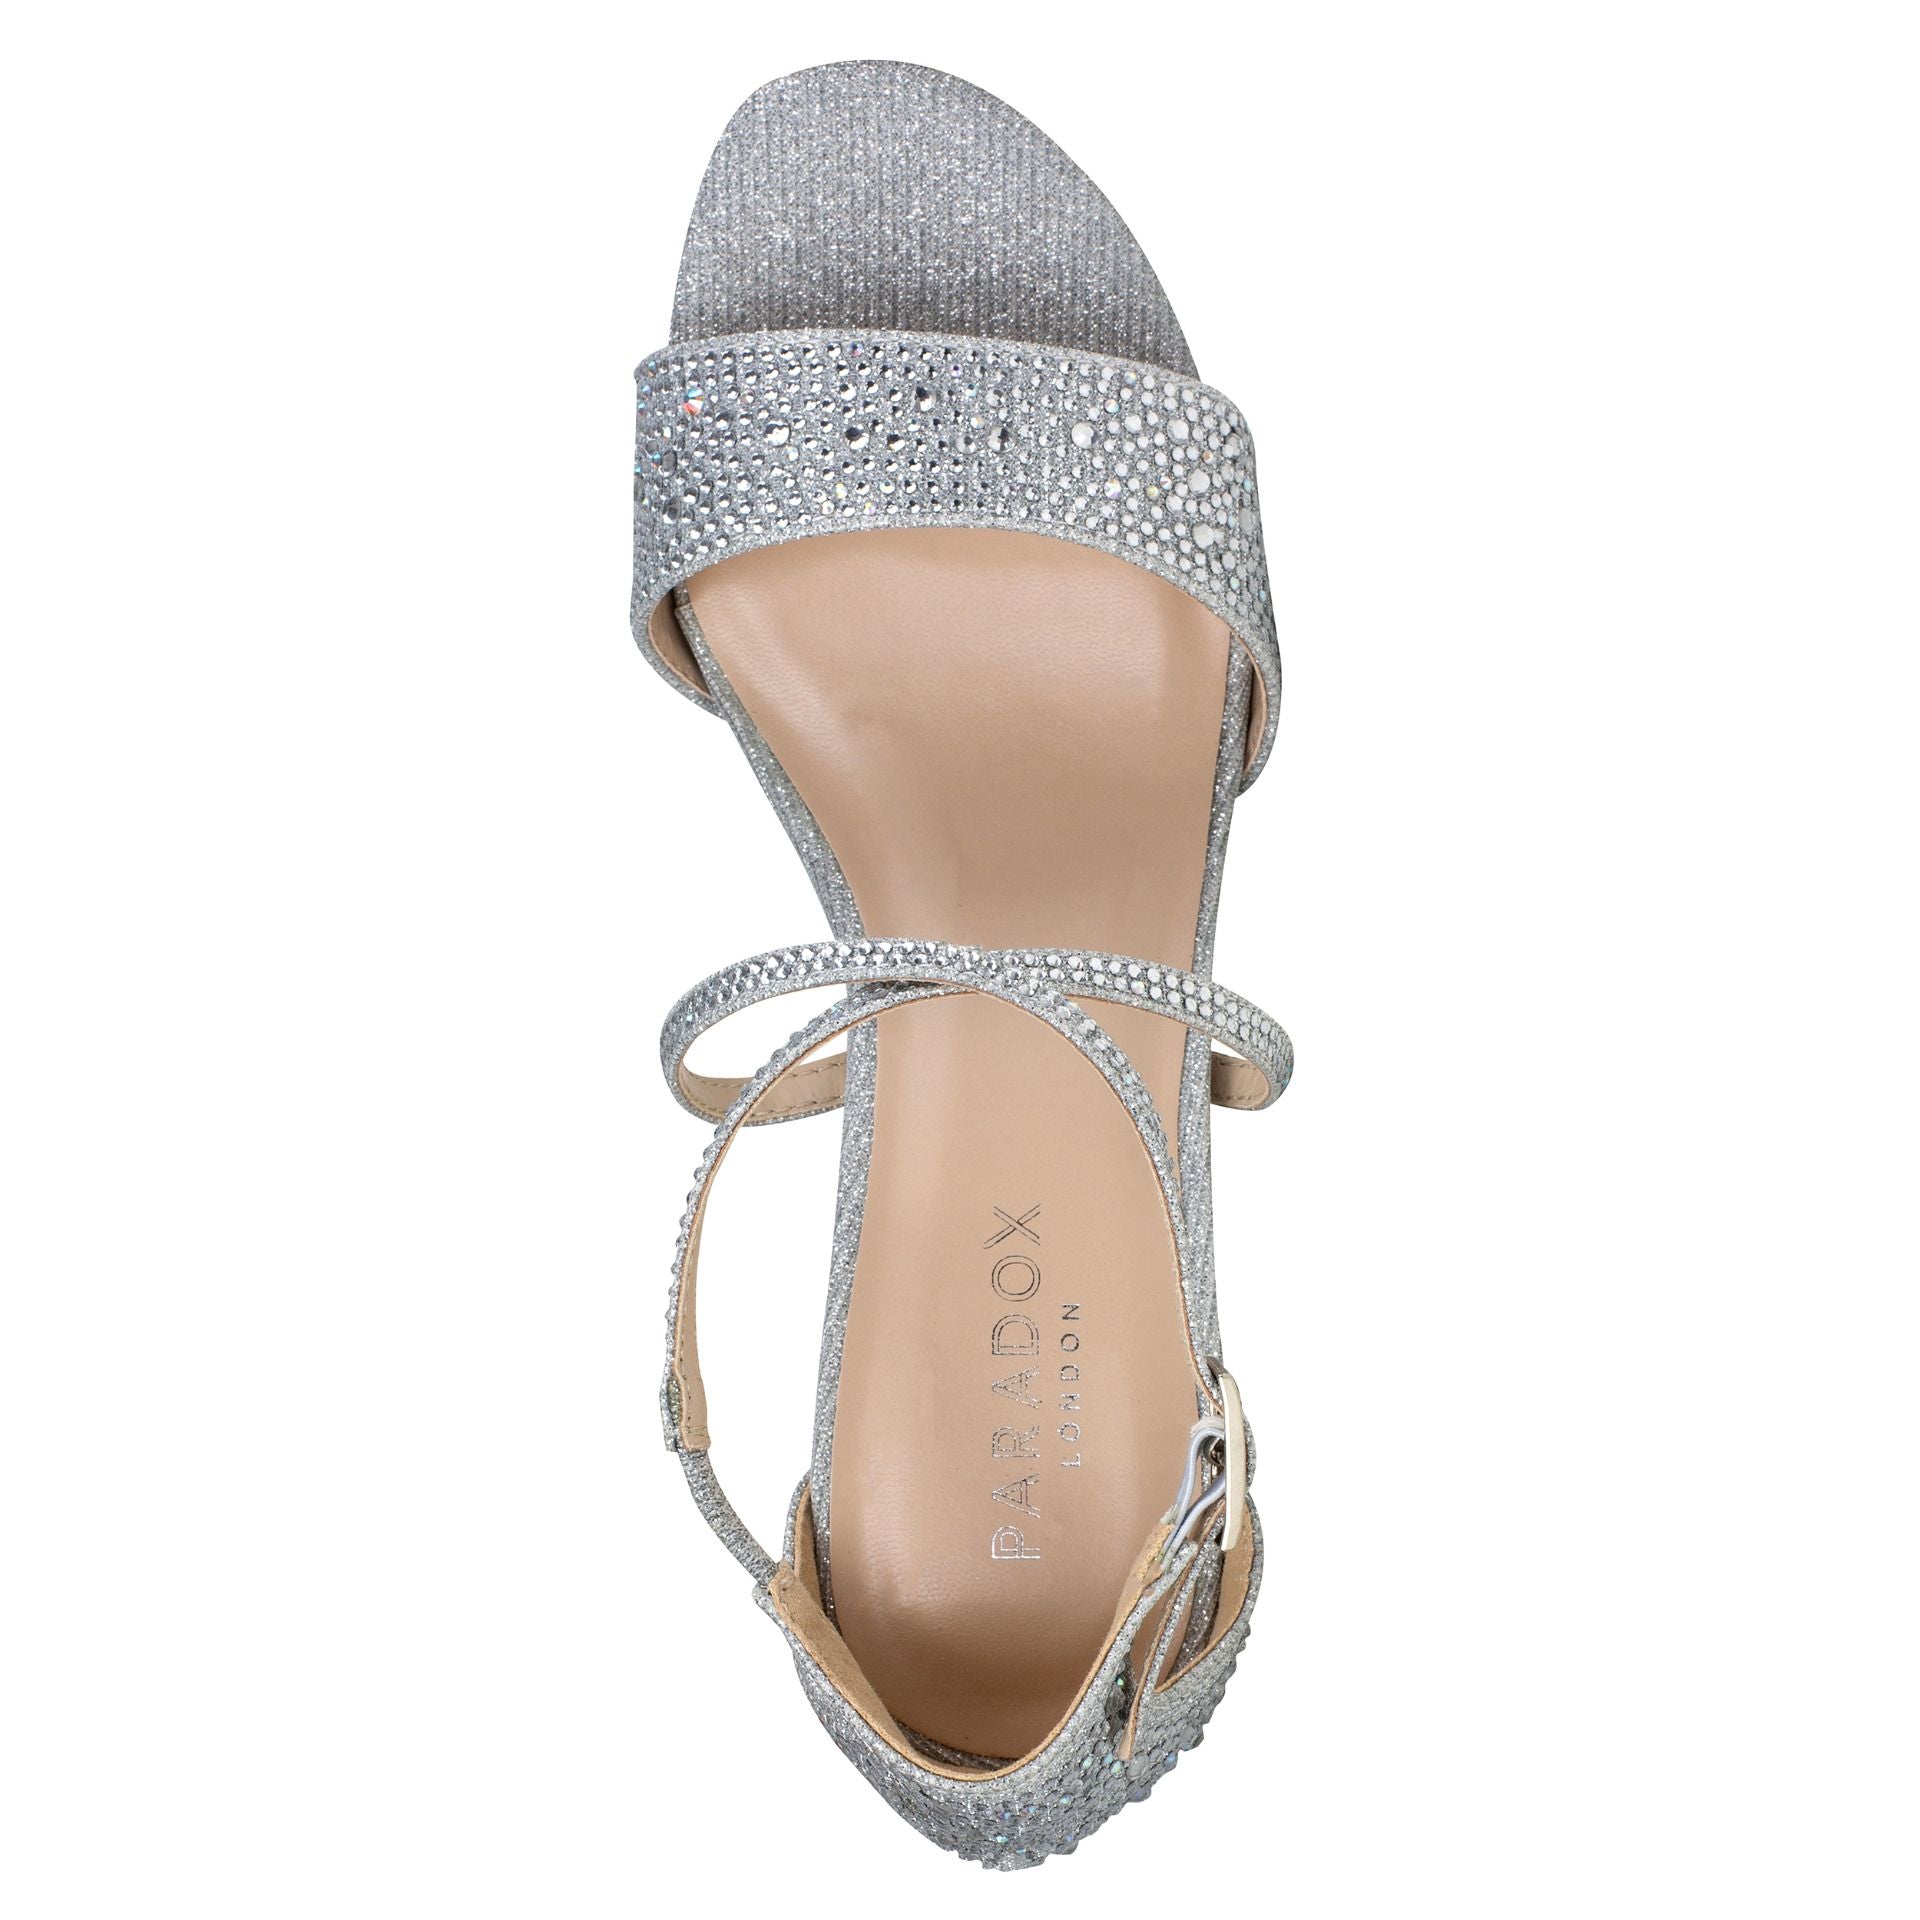 Overhead view of Metallic silver shoe with 2" block heel and criss cross straps